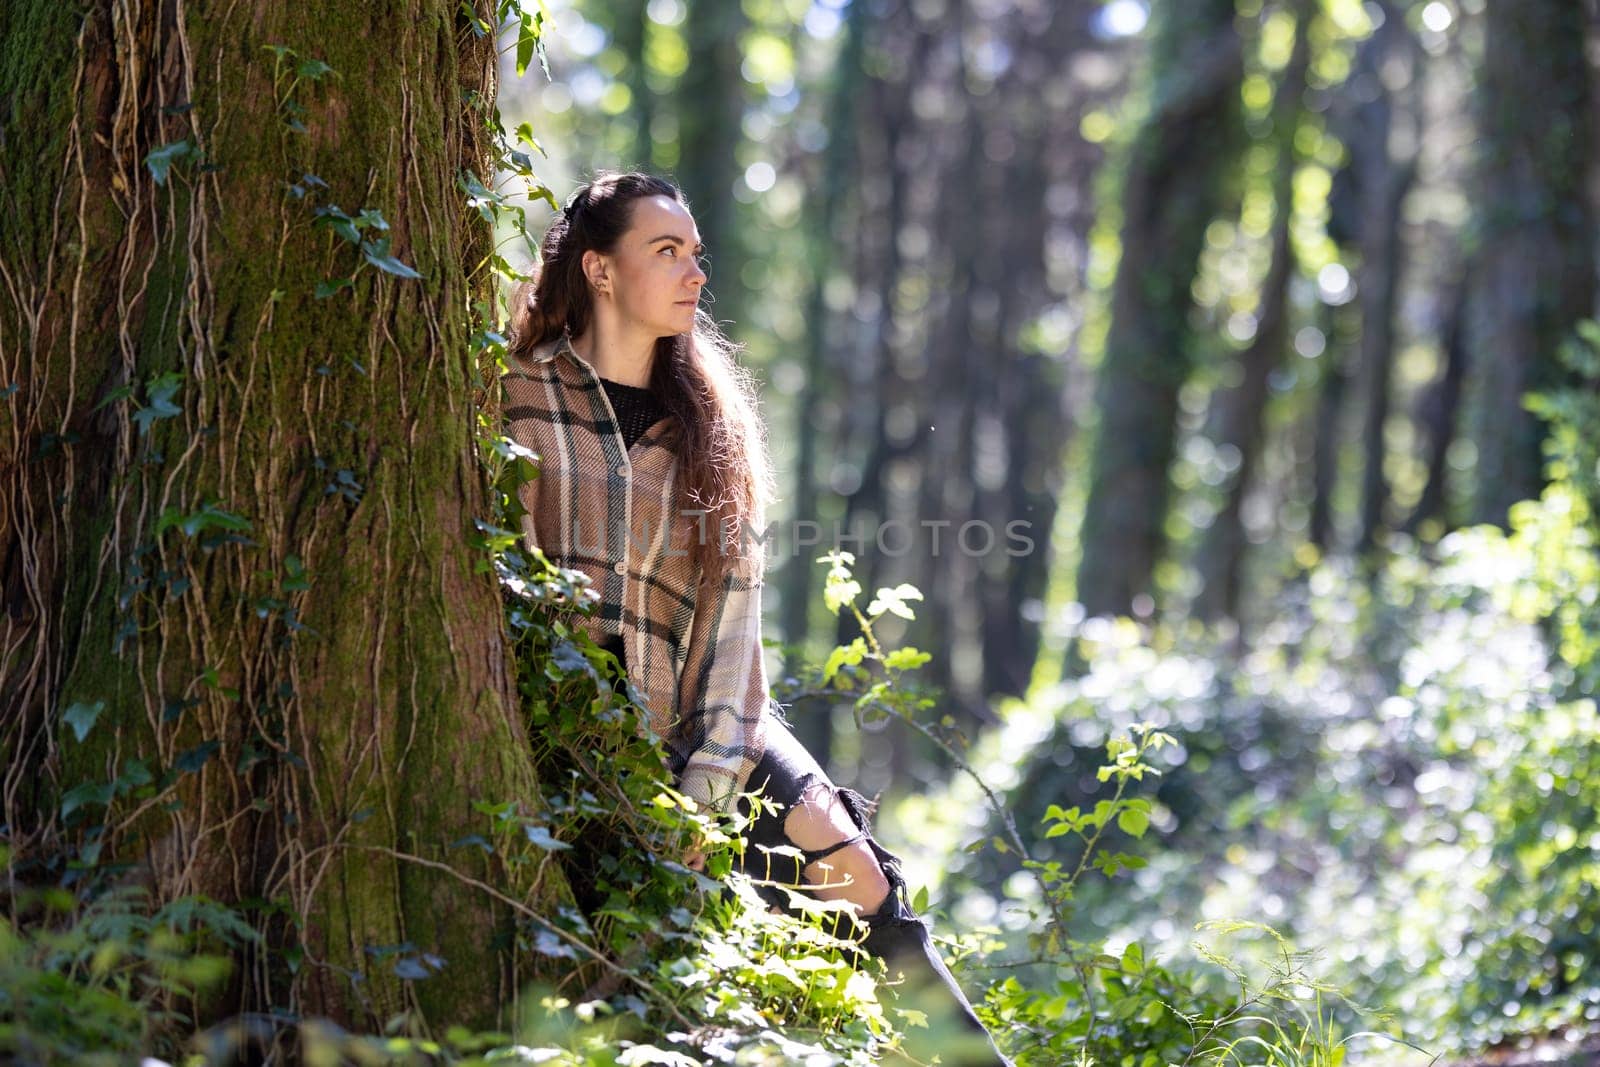 Woman Standing Next to Tree in Forest by Studia72